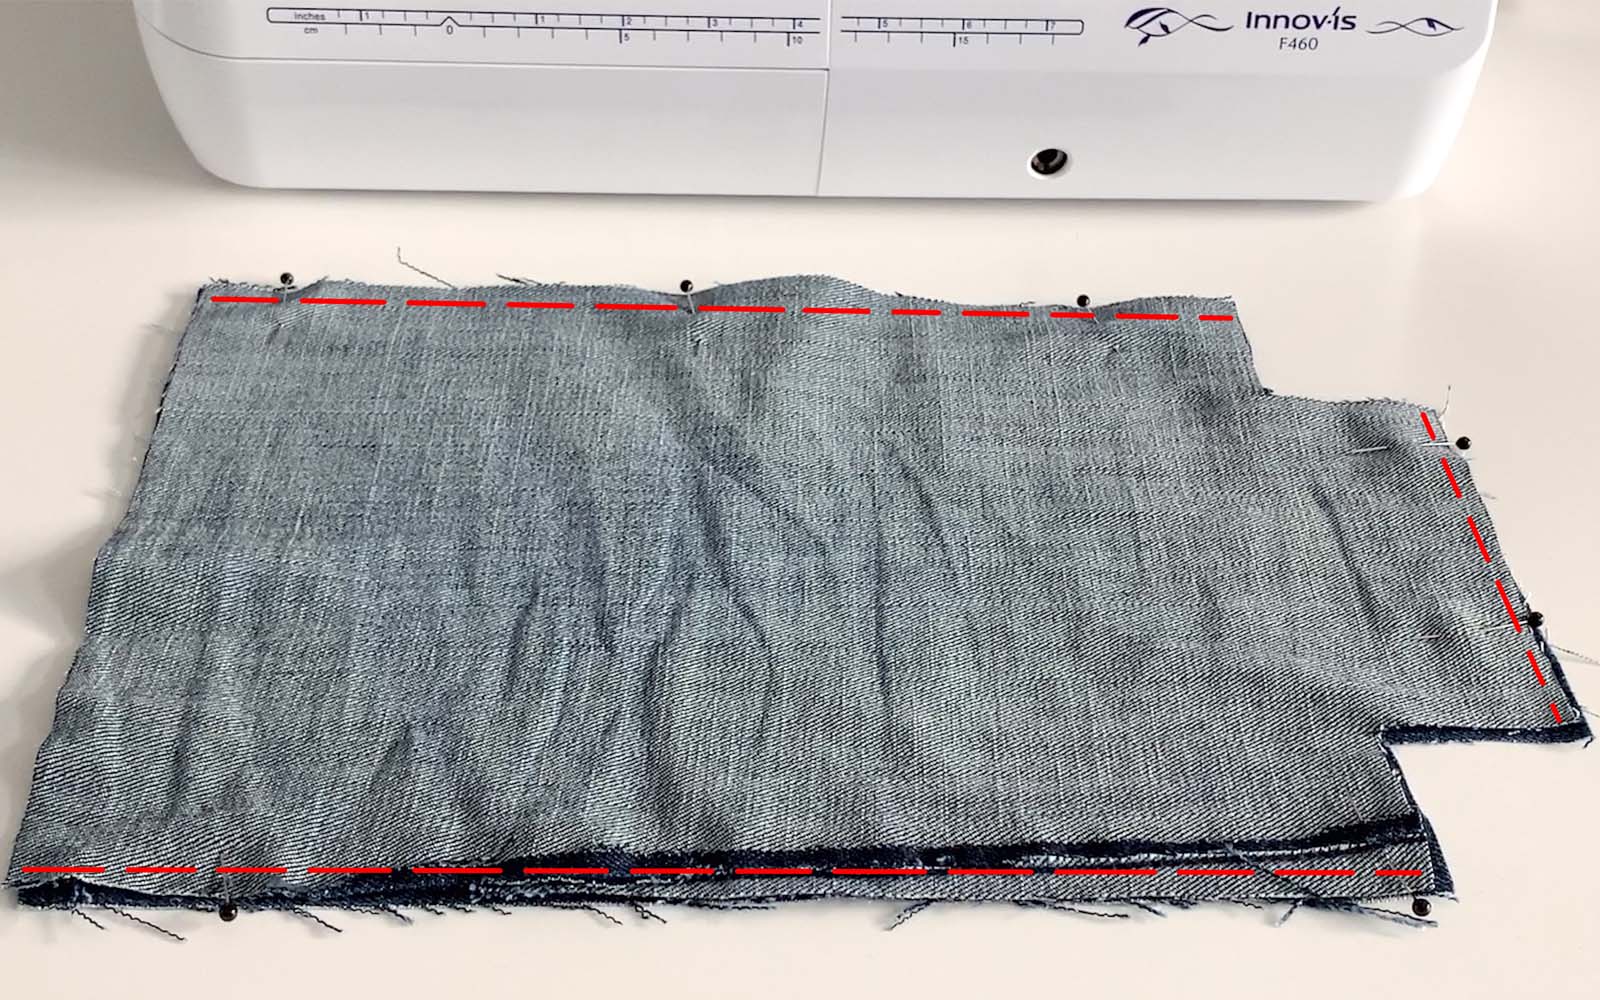 Square piece of blue denim with red sewing line marked on